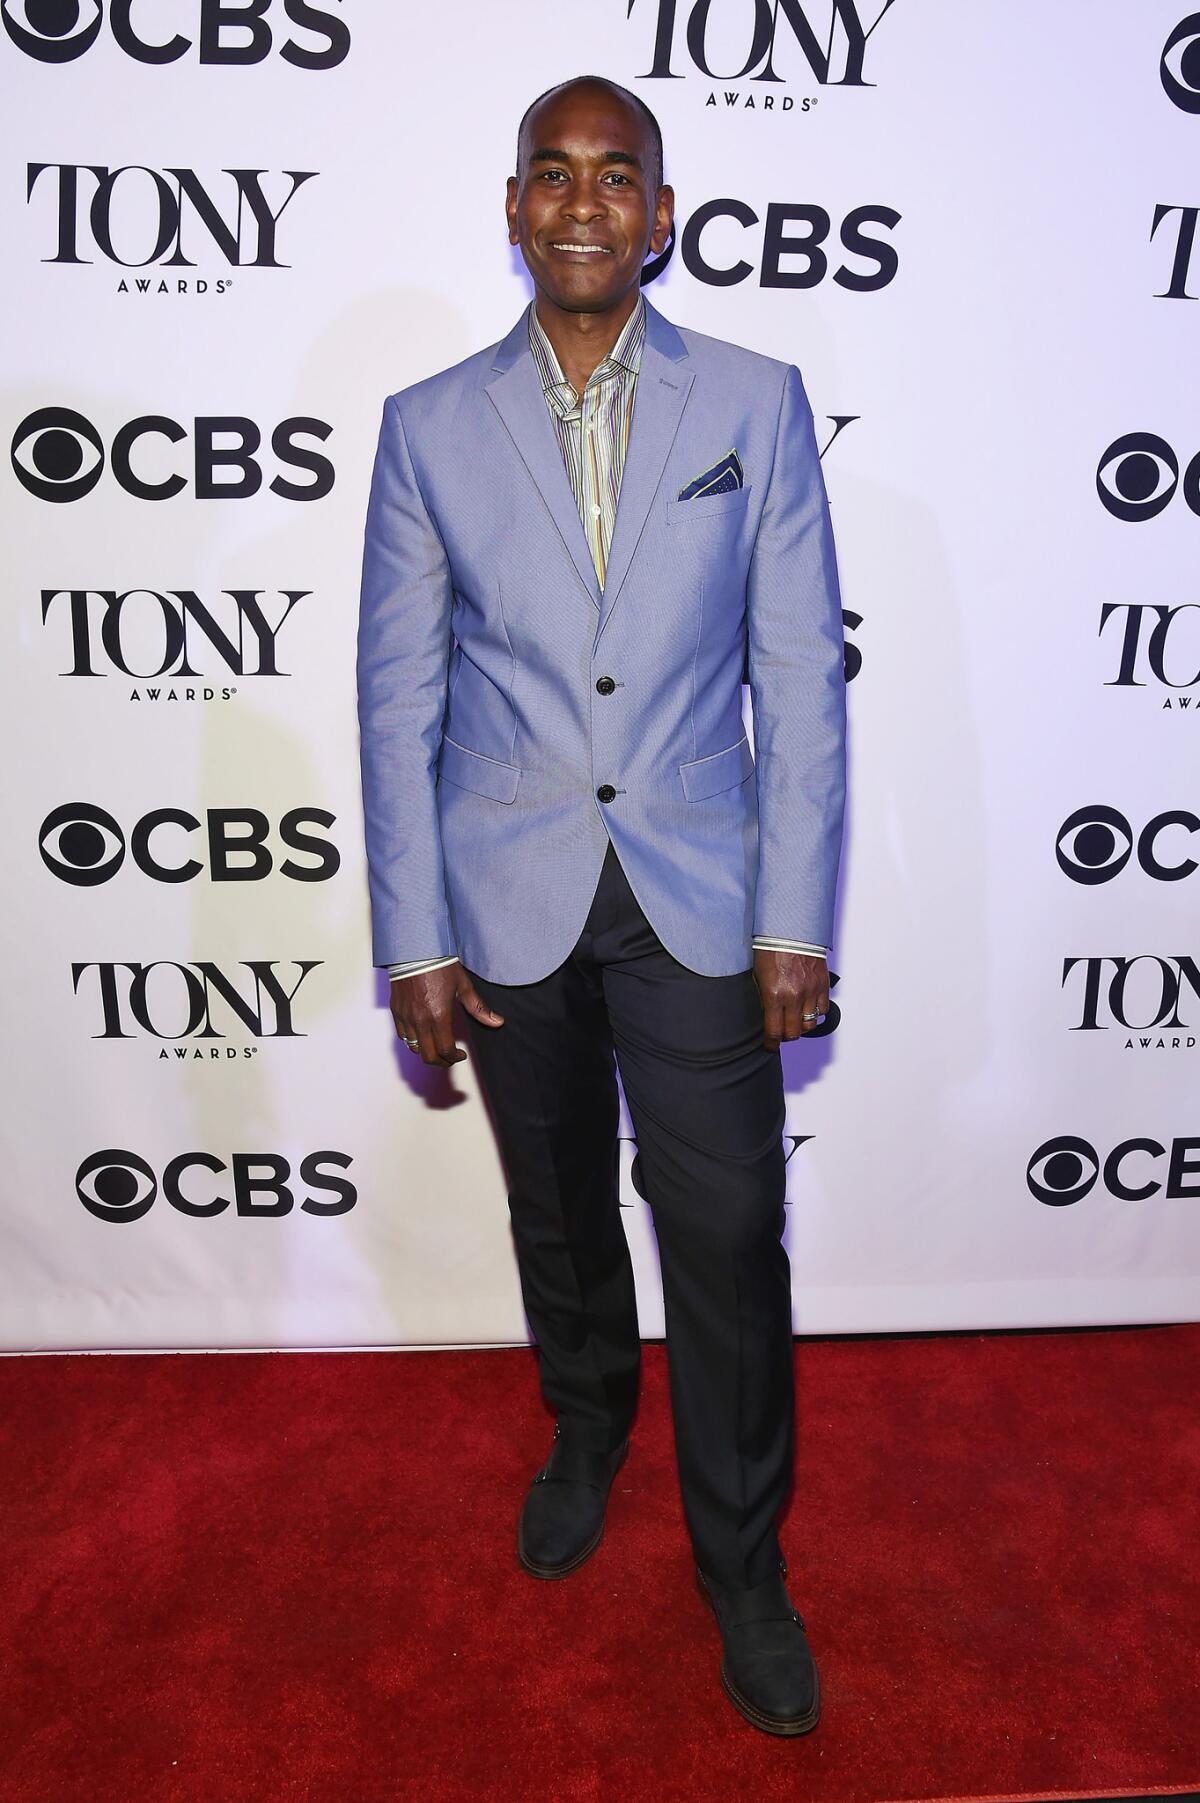 Tony-nominated costume design Paul Tazewell at a Tony Awards event Monday in New York City. (Gary Gershoff / Getty Images / Tony Awards Productions)